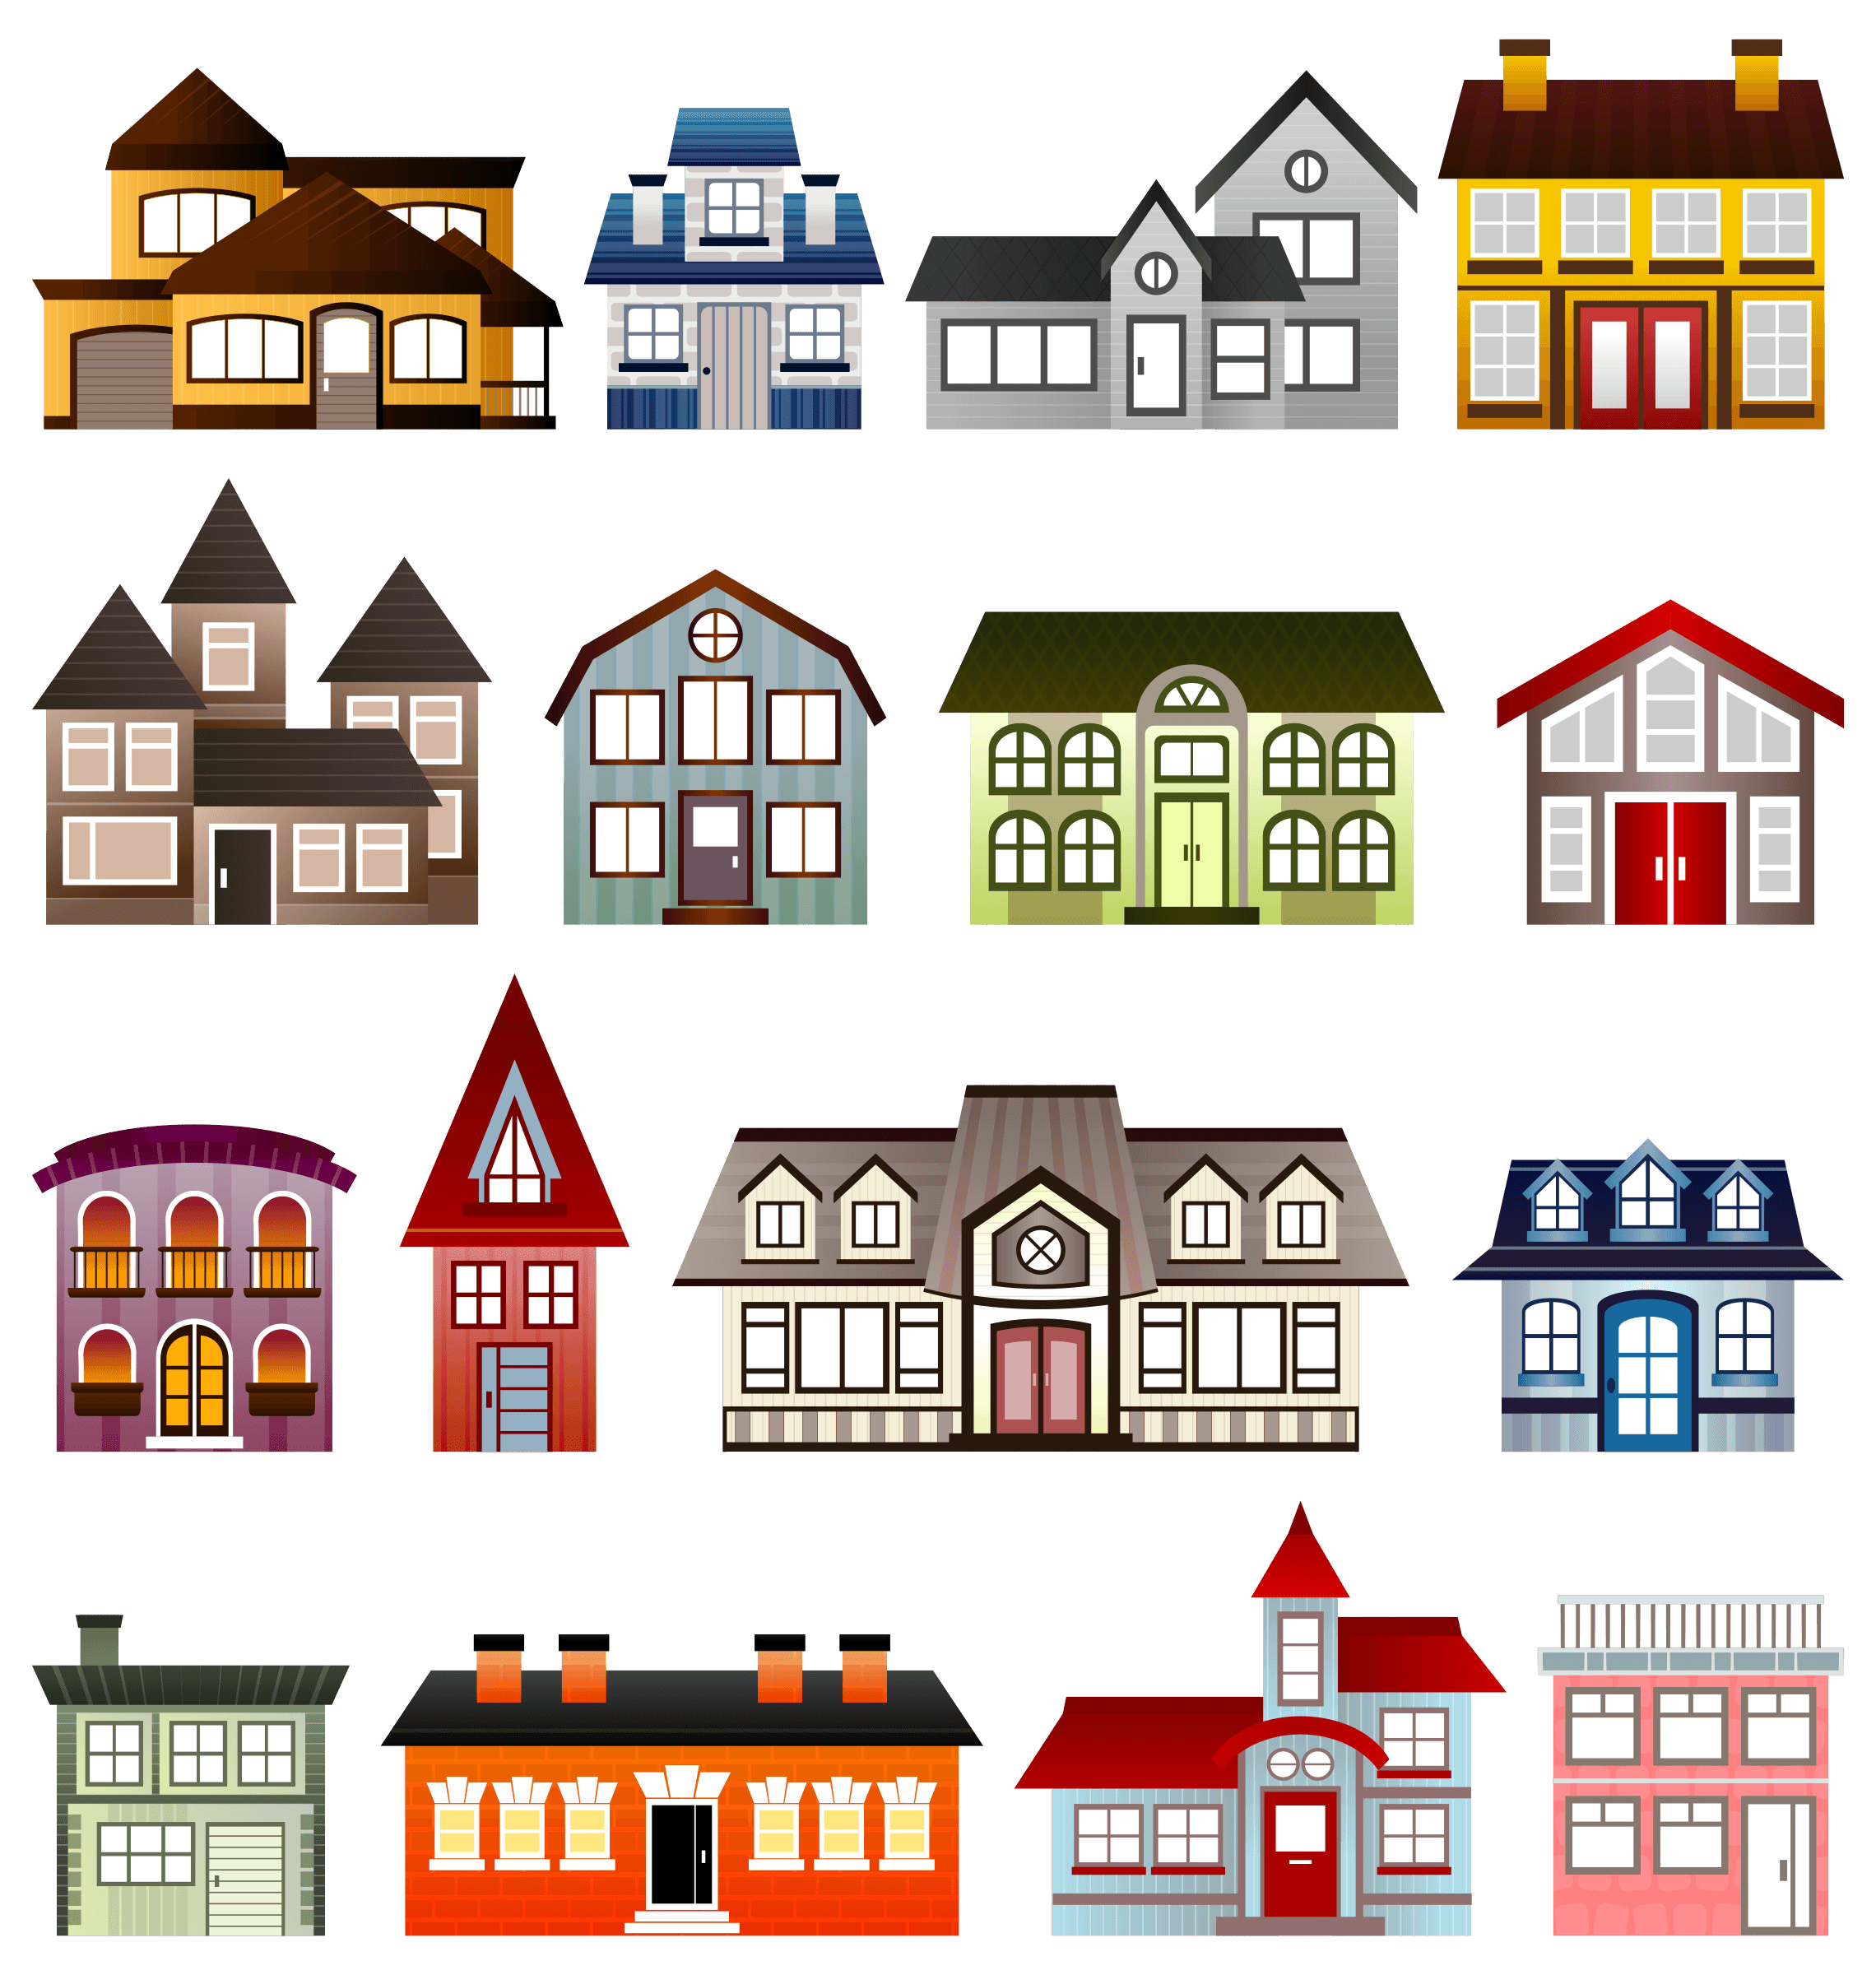 pucca houses